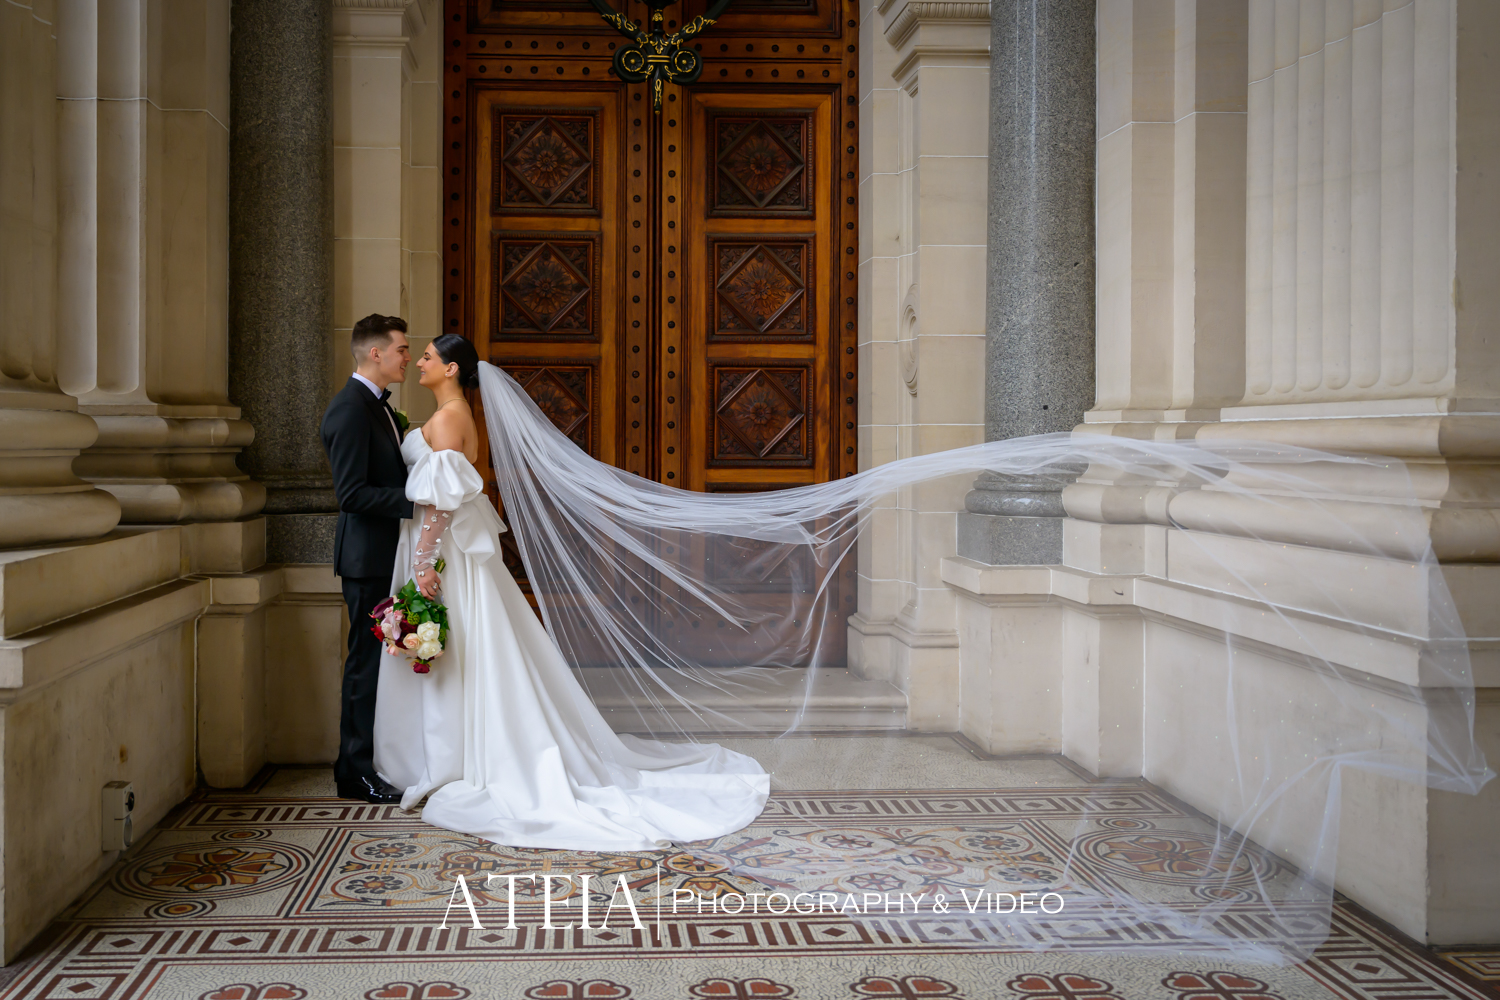 , Madeleine and Nathan&#8217;s wedding photography at Carousel Albert Park captured by ATEIA Photography &#038; Video